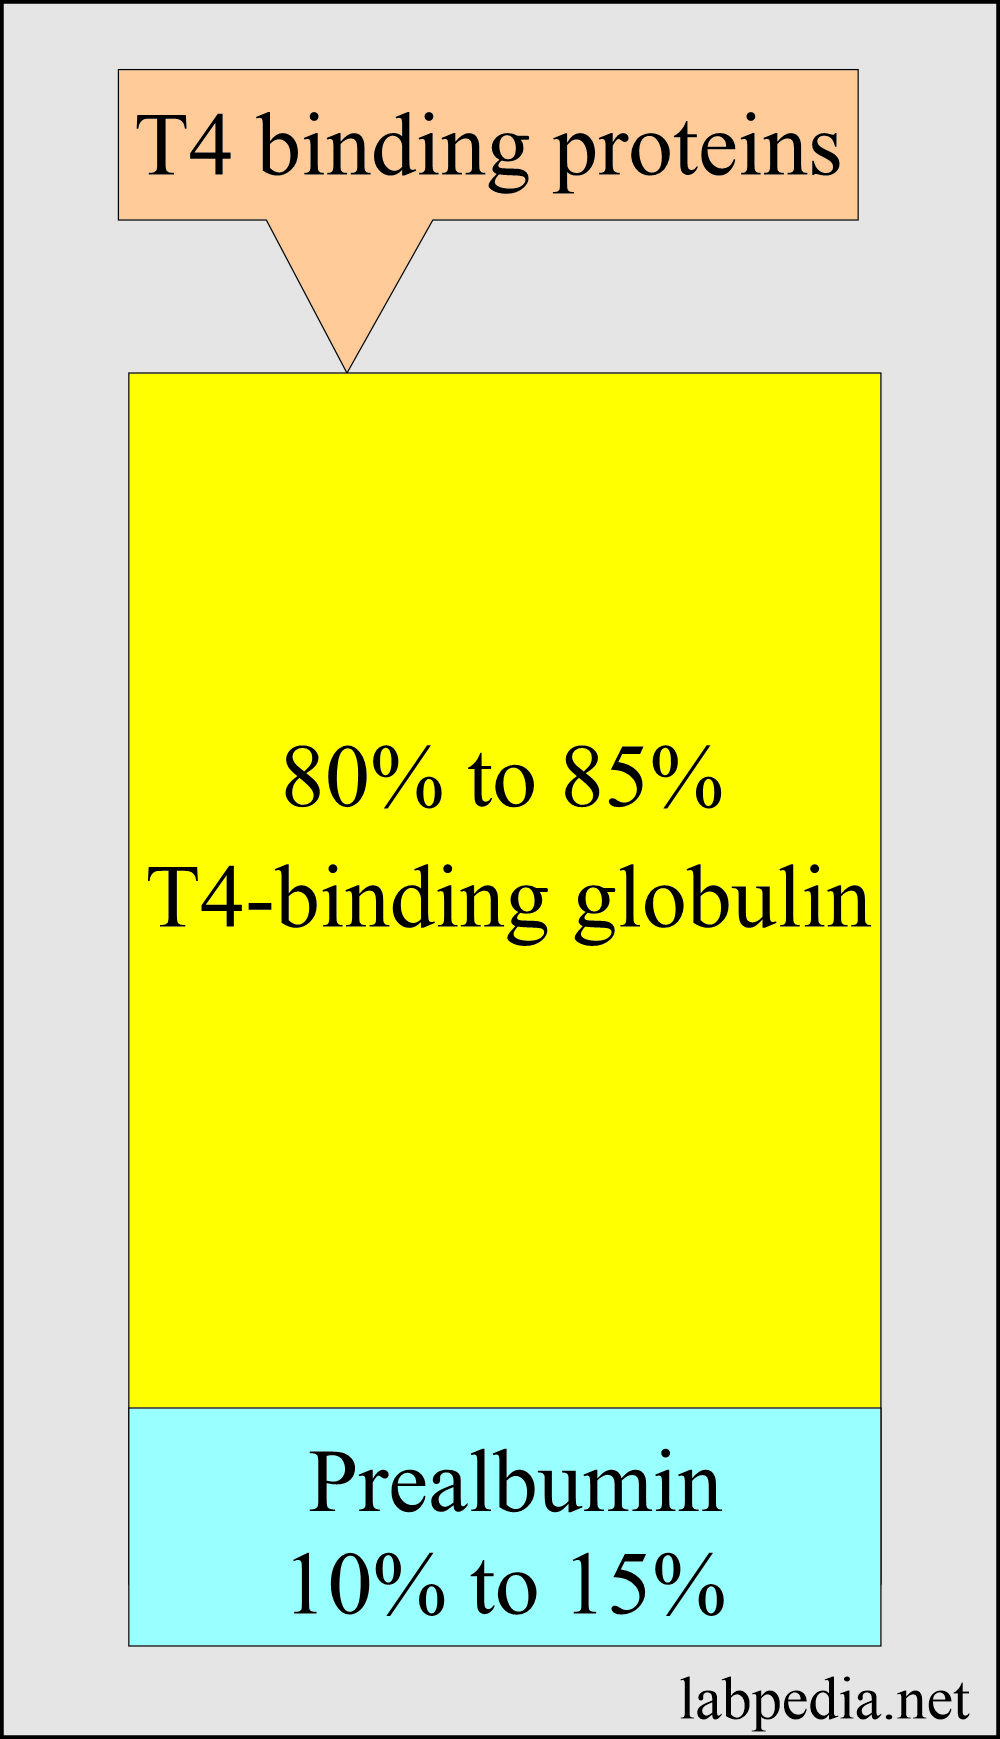 T4 binding proteins